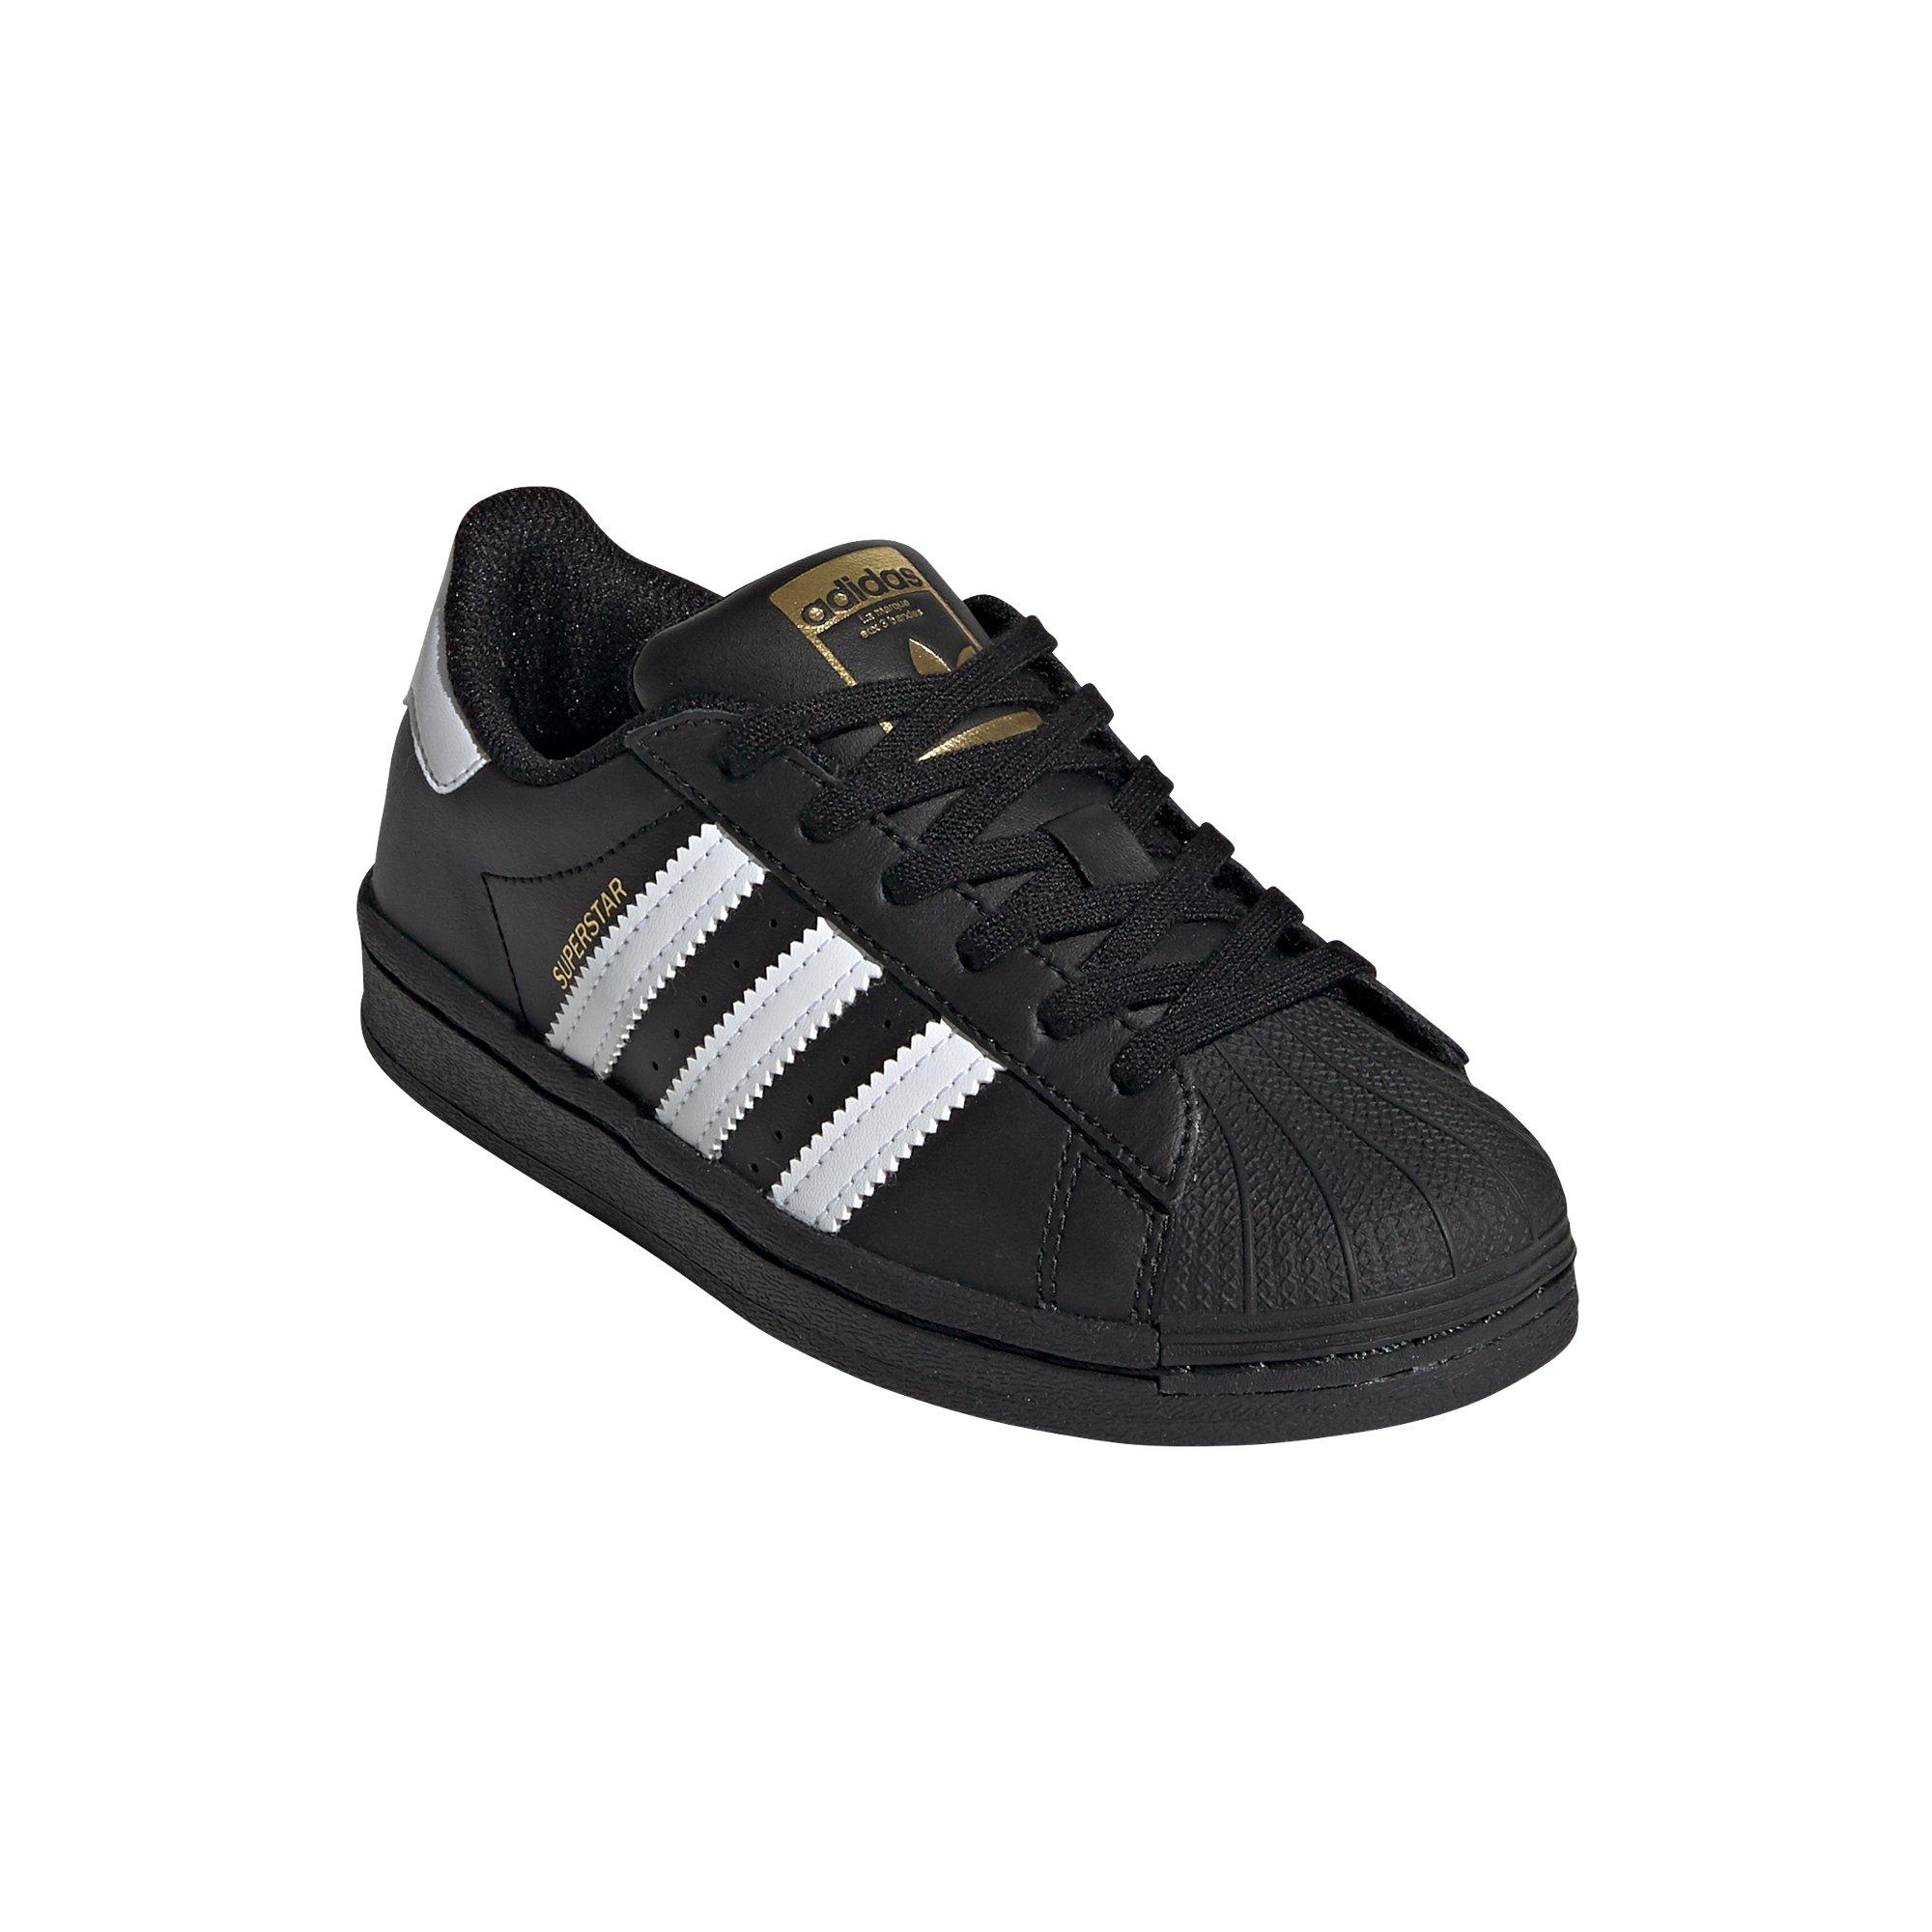 HIGHTOP Adidas Superstar 789002 White with Black Stripe Shell Toe Size 3Y